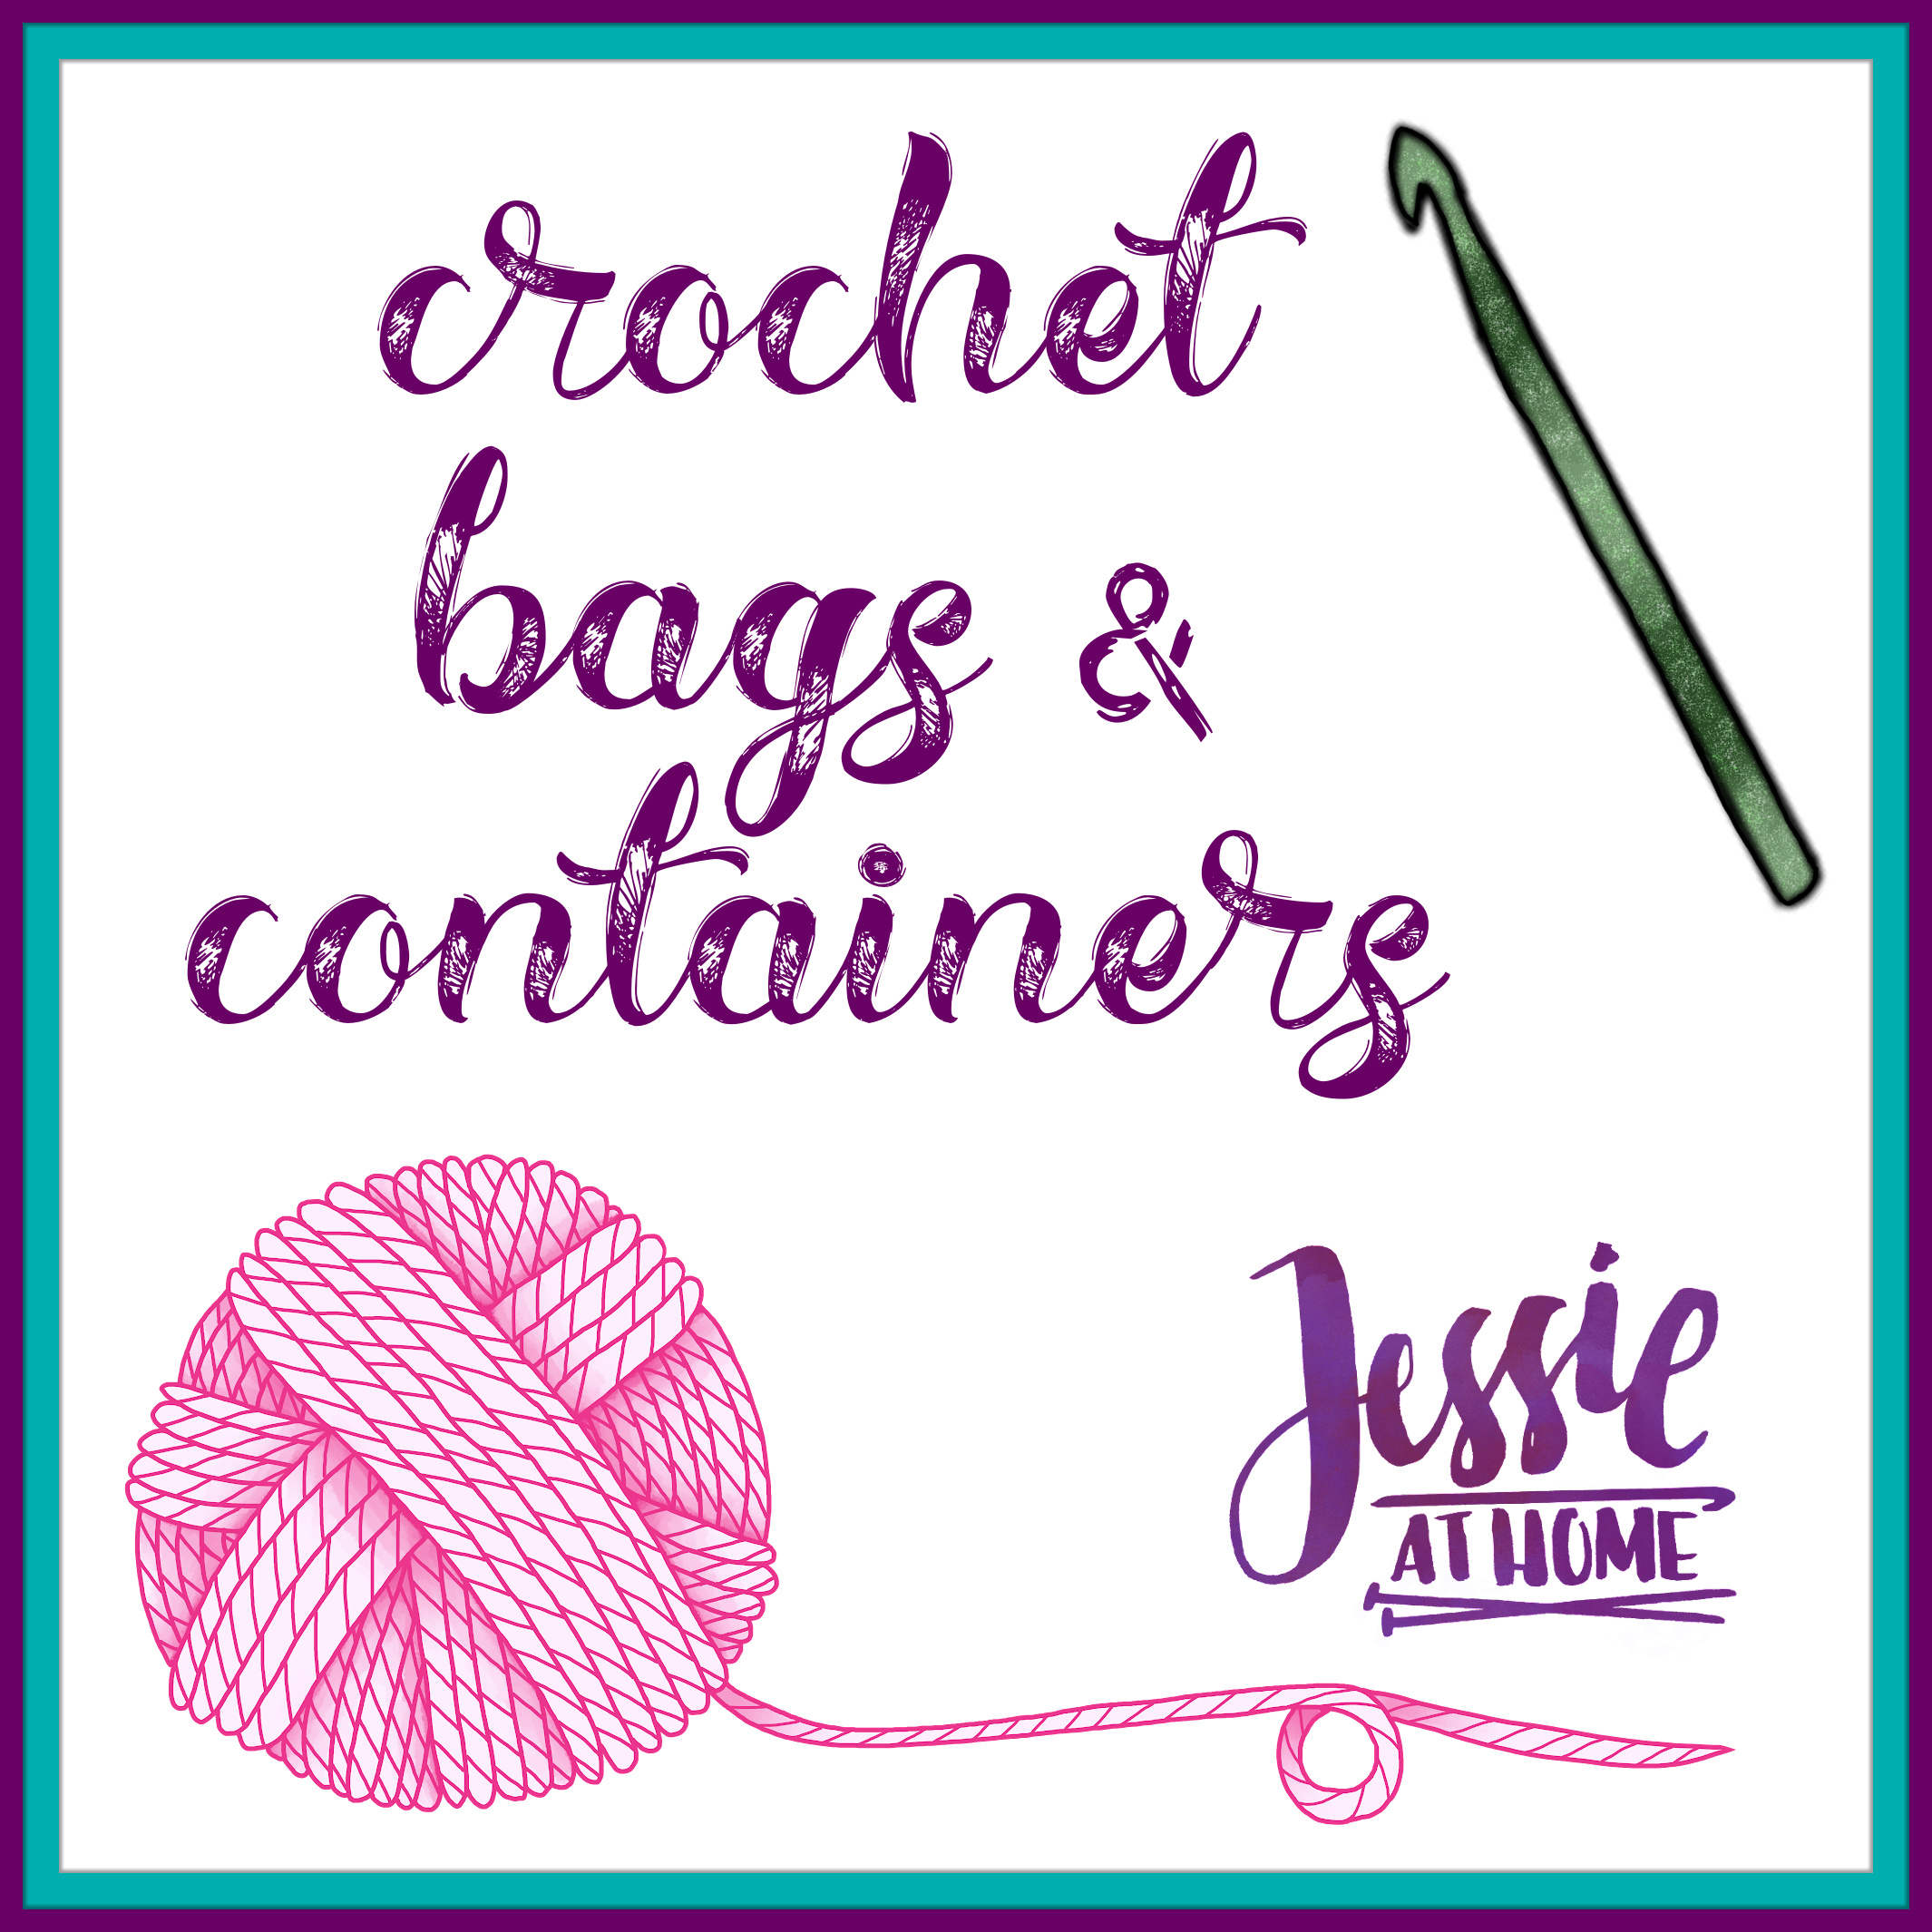 Crochet Bags & Containers Menu on Jessie At Home